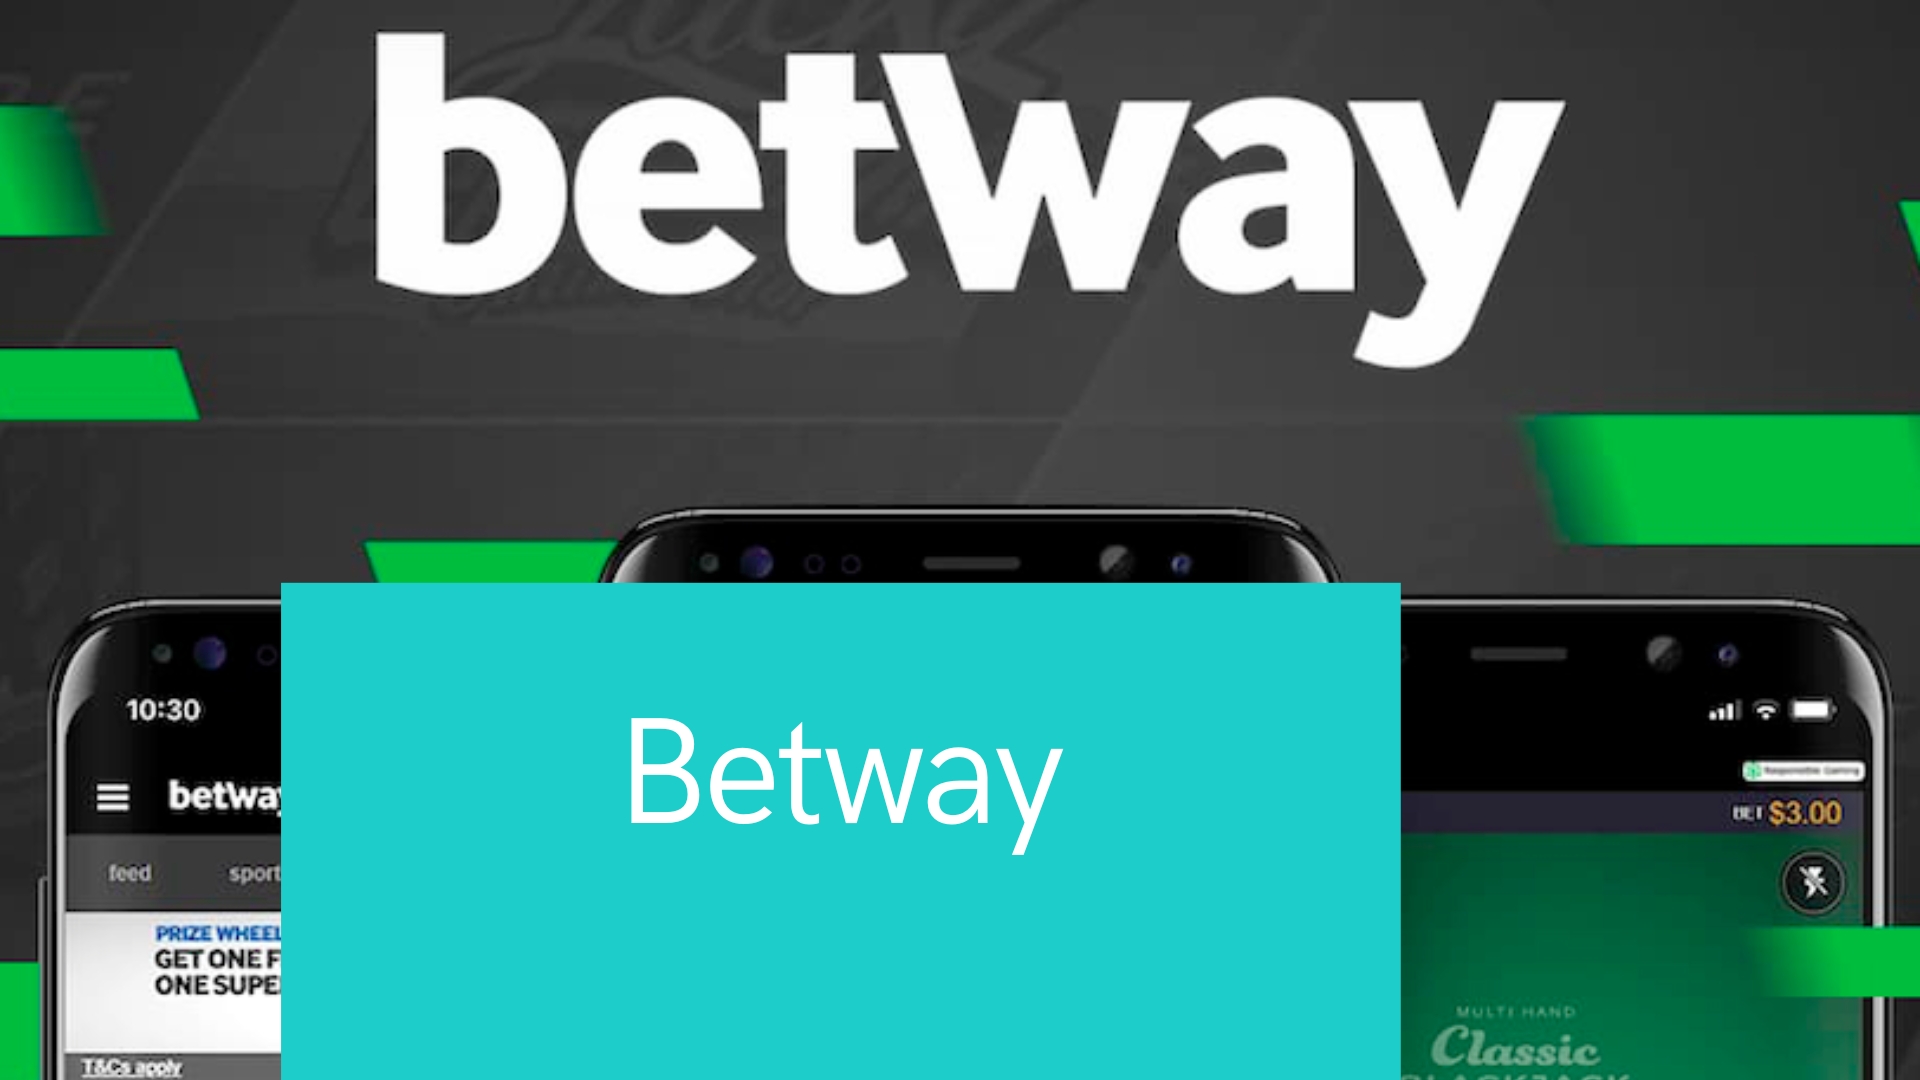 What is a Betway bookie?